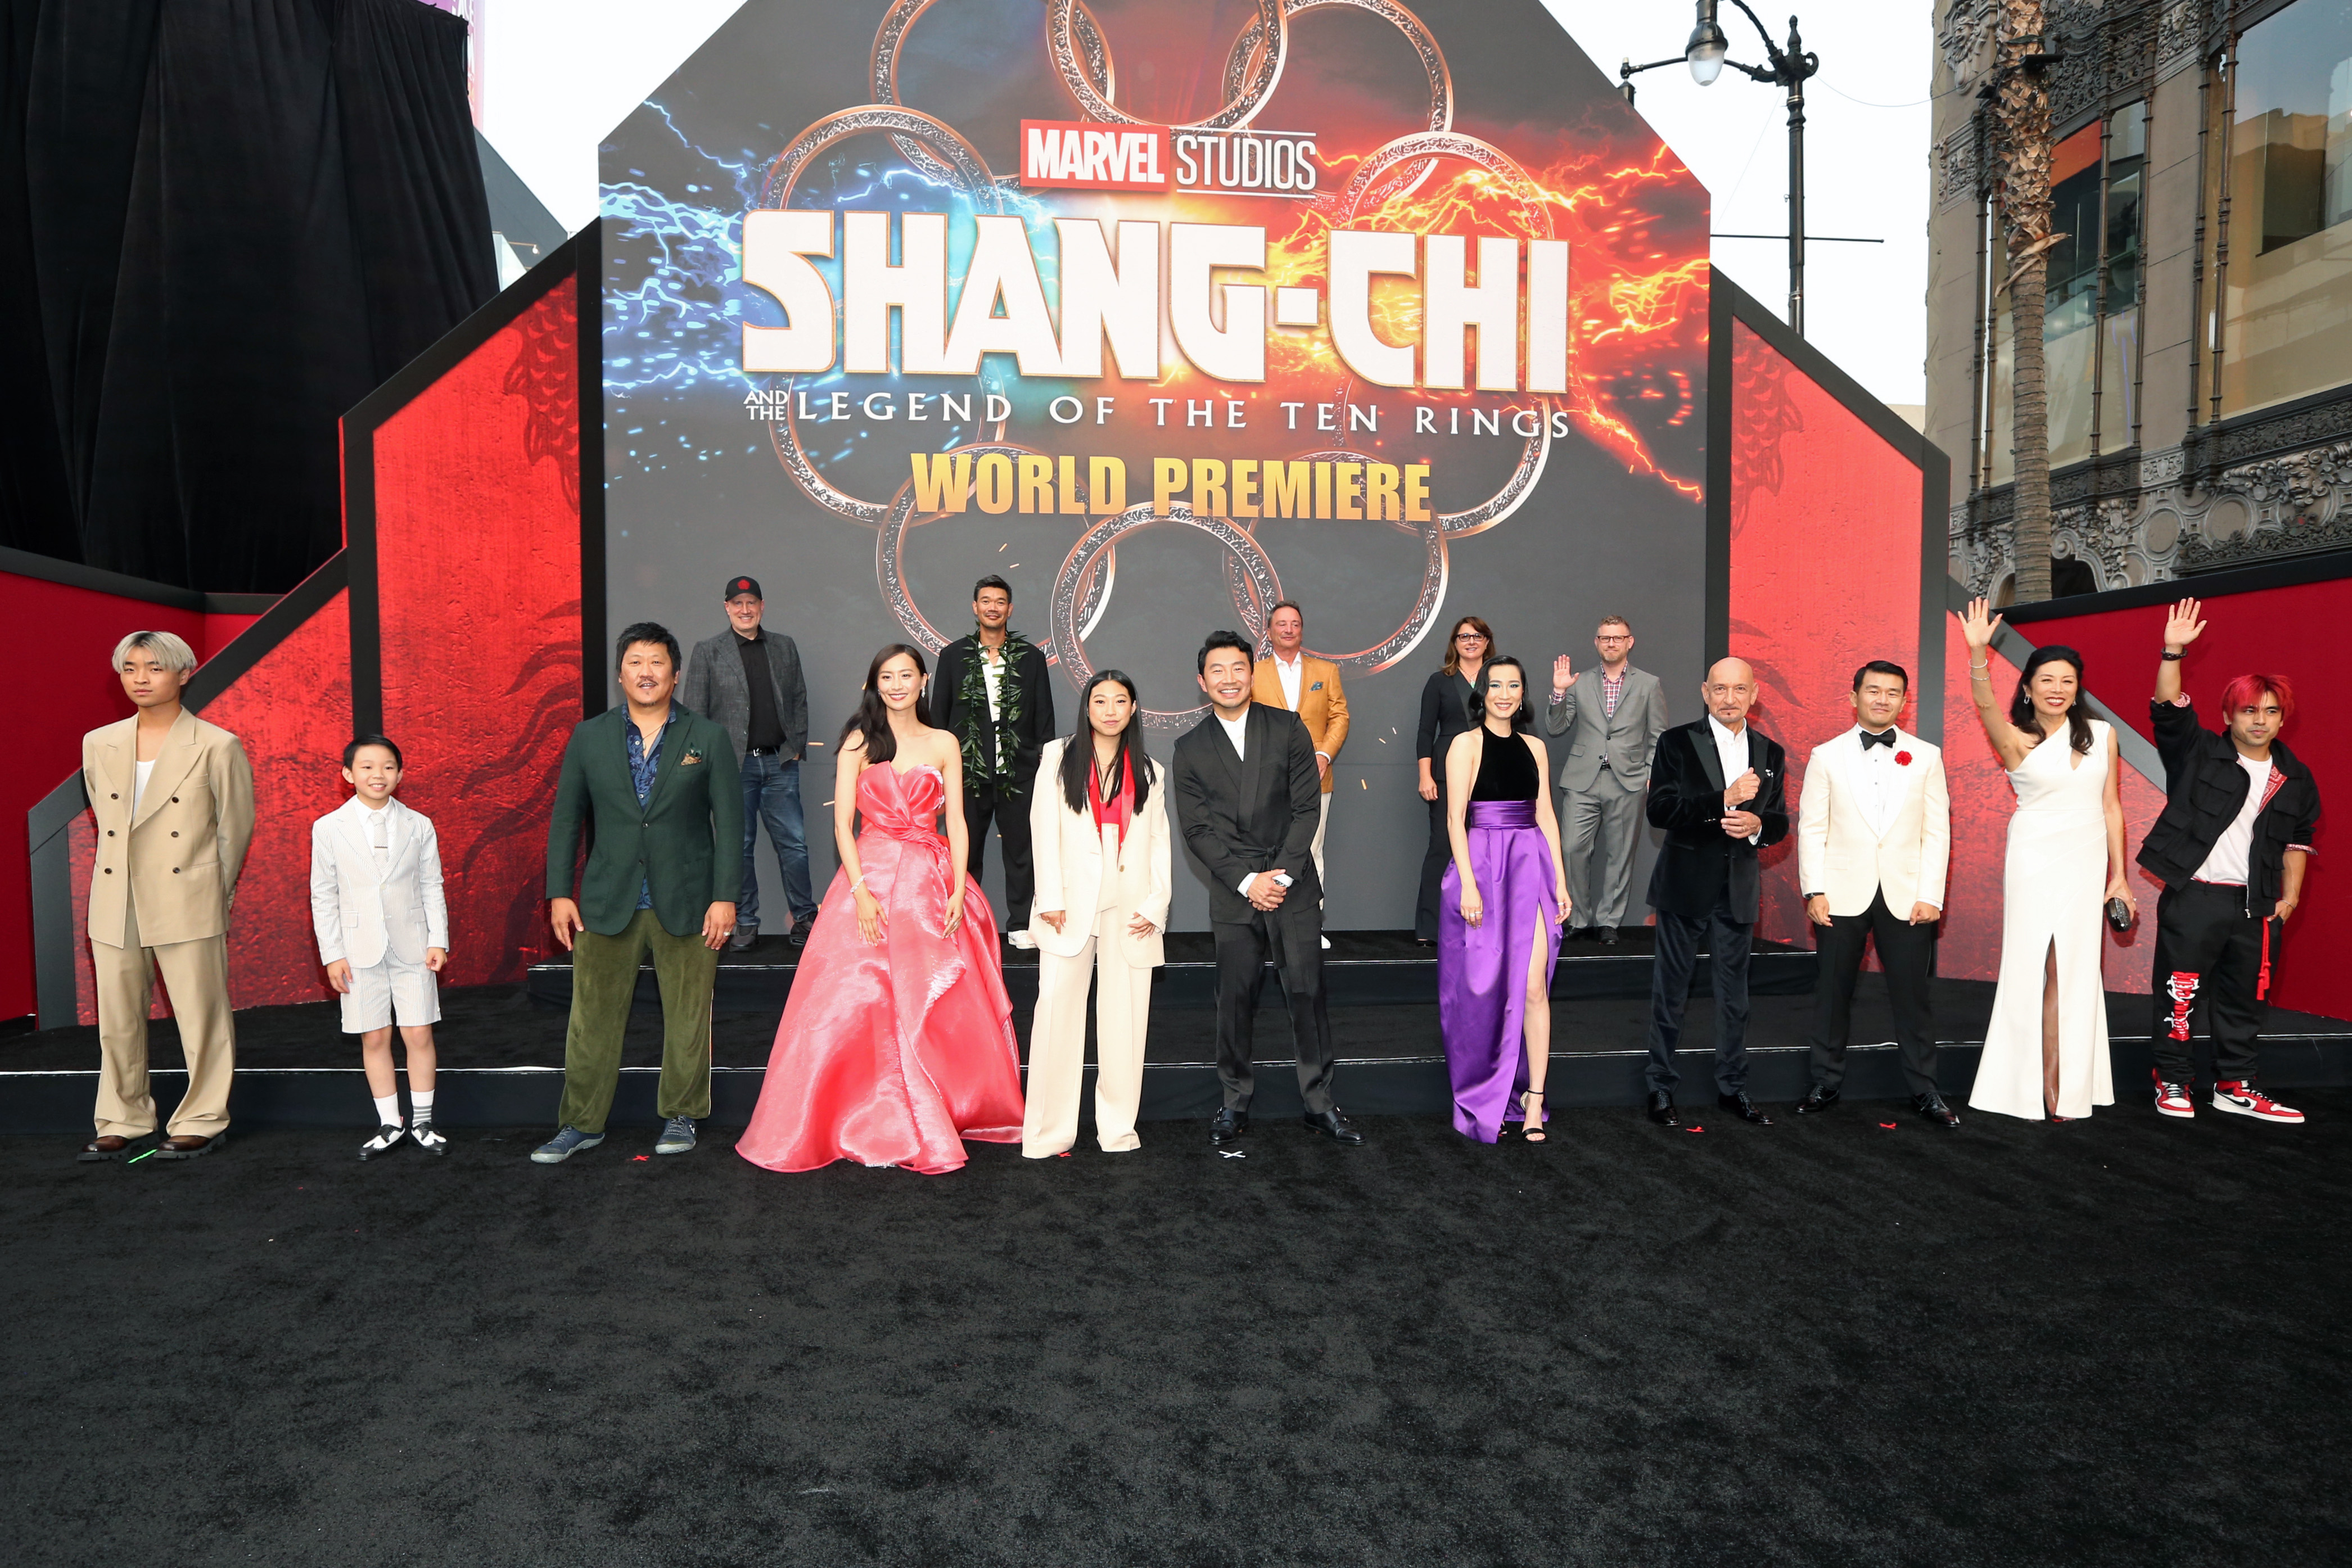 The cast and crew of 'Shang-Chi and the Legend of the Ten Rings' dressed formally and posed in front of a sign for the film at the world premiere.